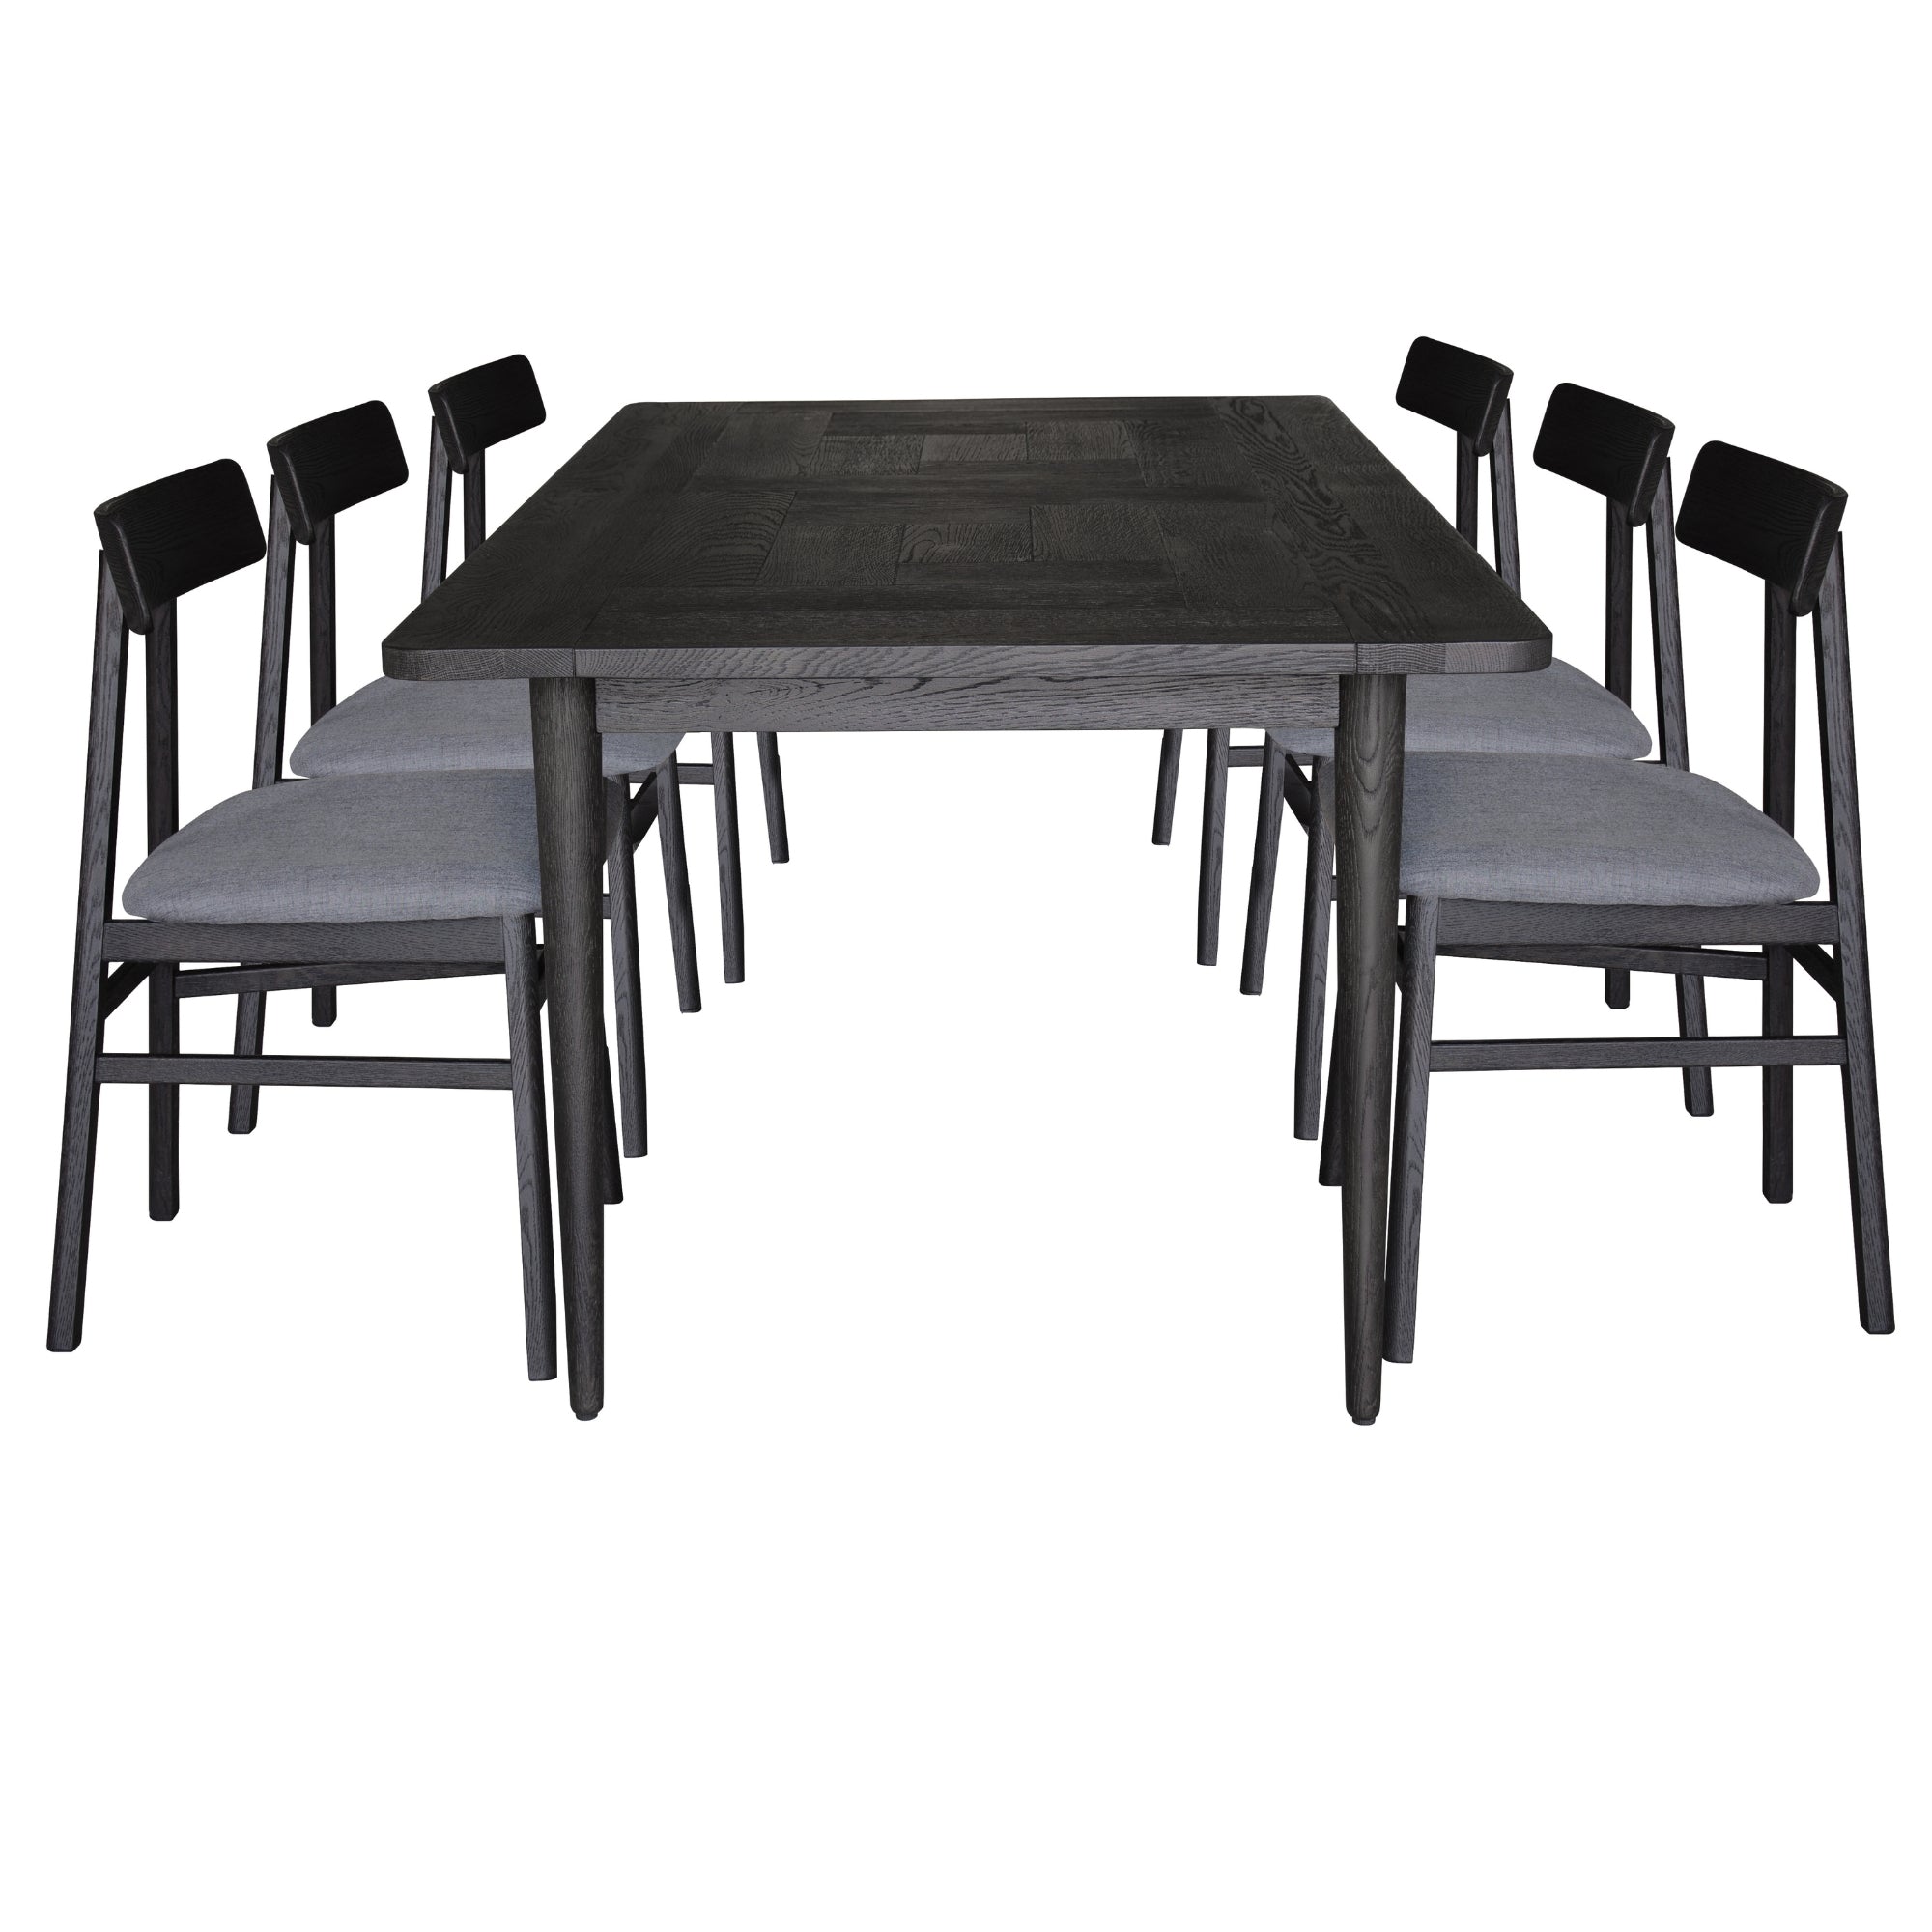 Claire 7pc Dining Set Table 180cm Solid Oak Wood Fabric Seat Chair - Black